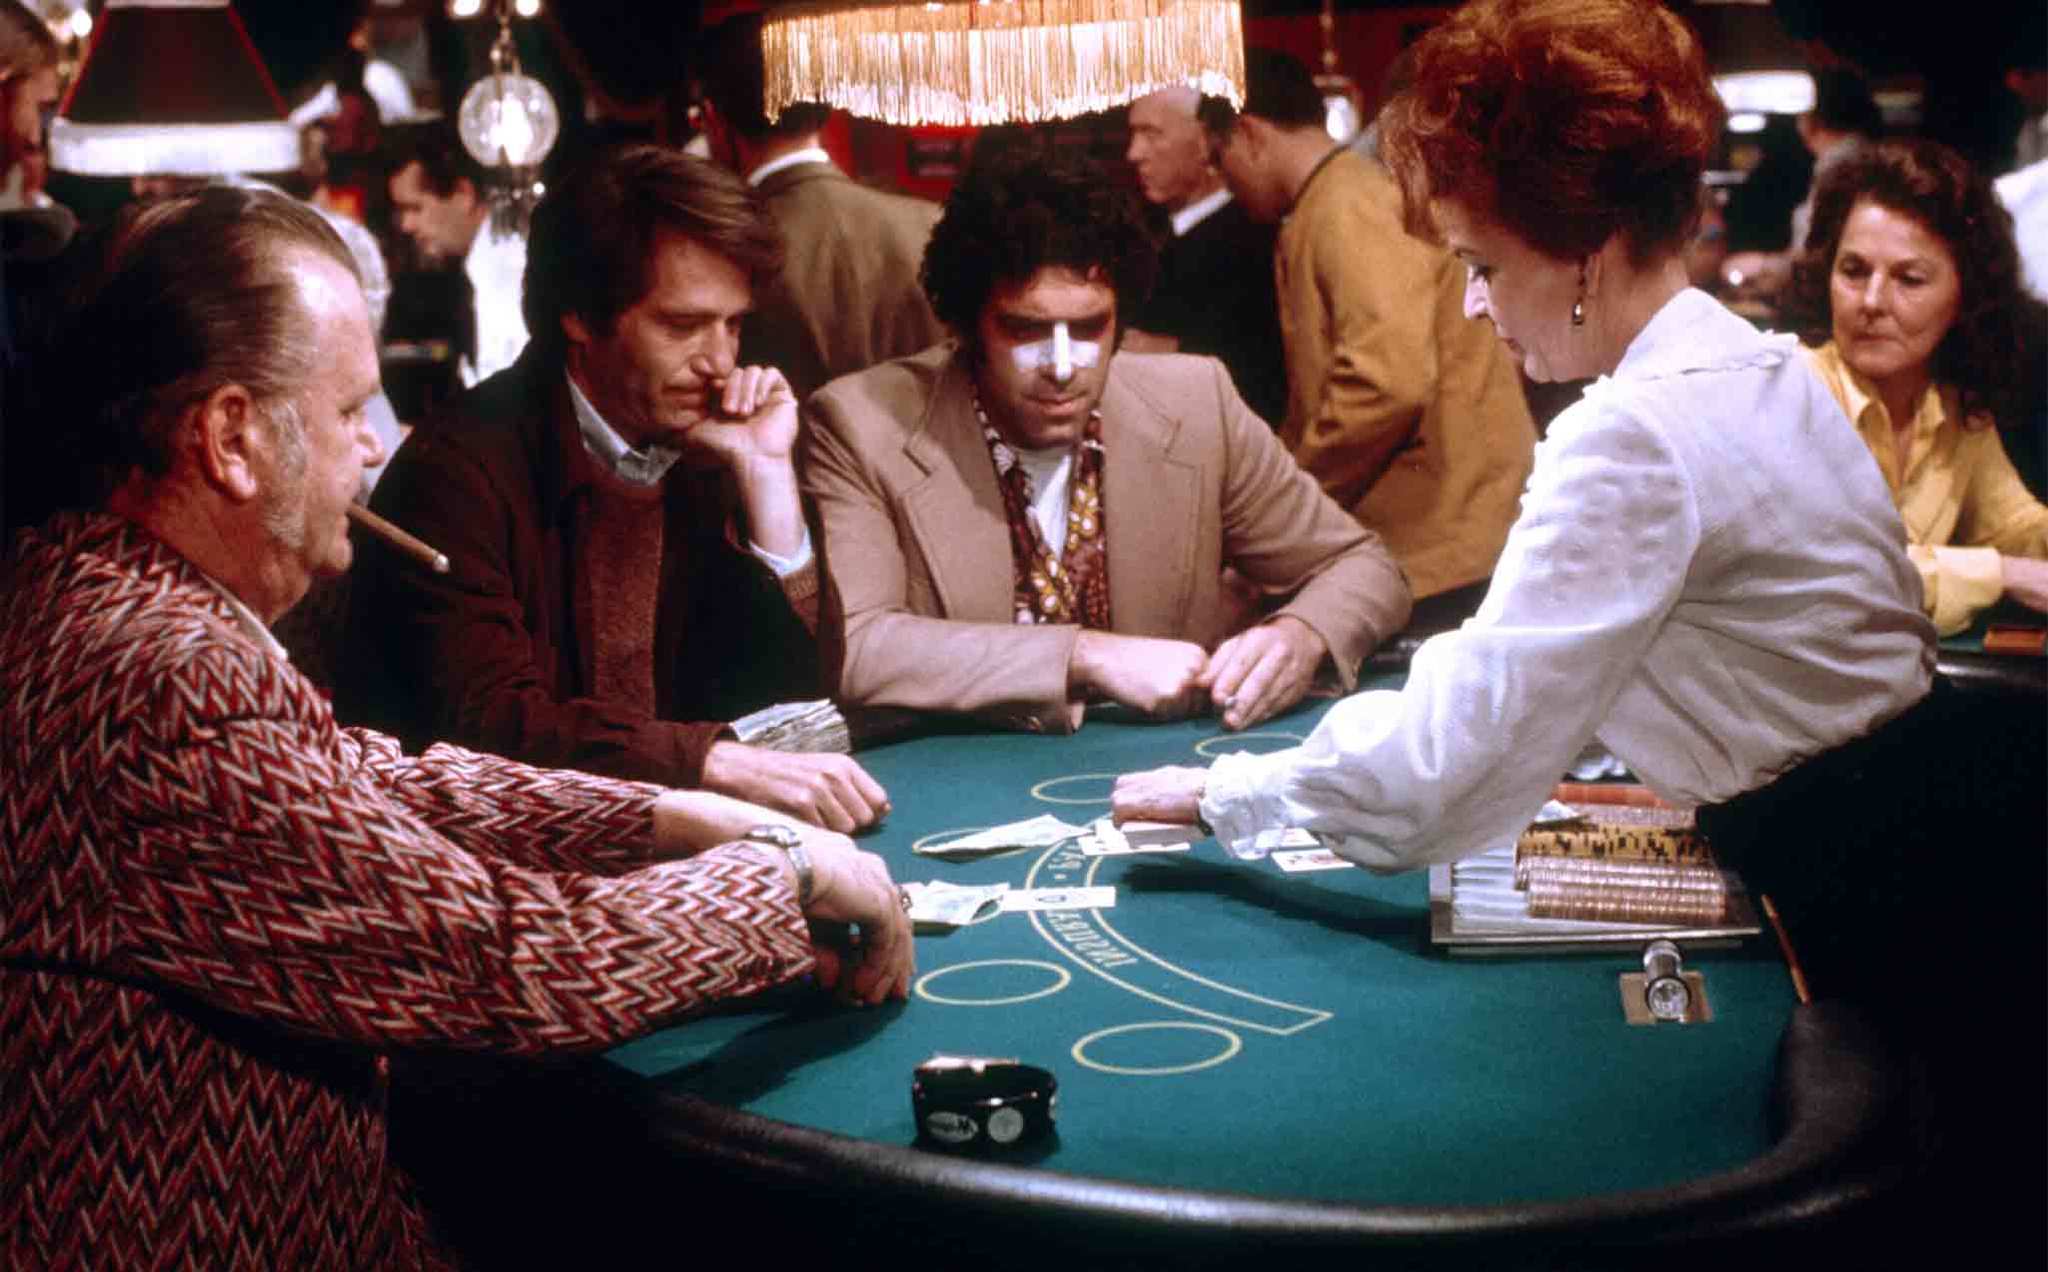 California Split (1974) Directed by Robert Altman Shown second from left: George Segal (as Bill Denny), Elliott Gould (as Charlie Waters)